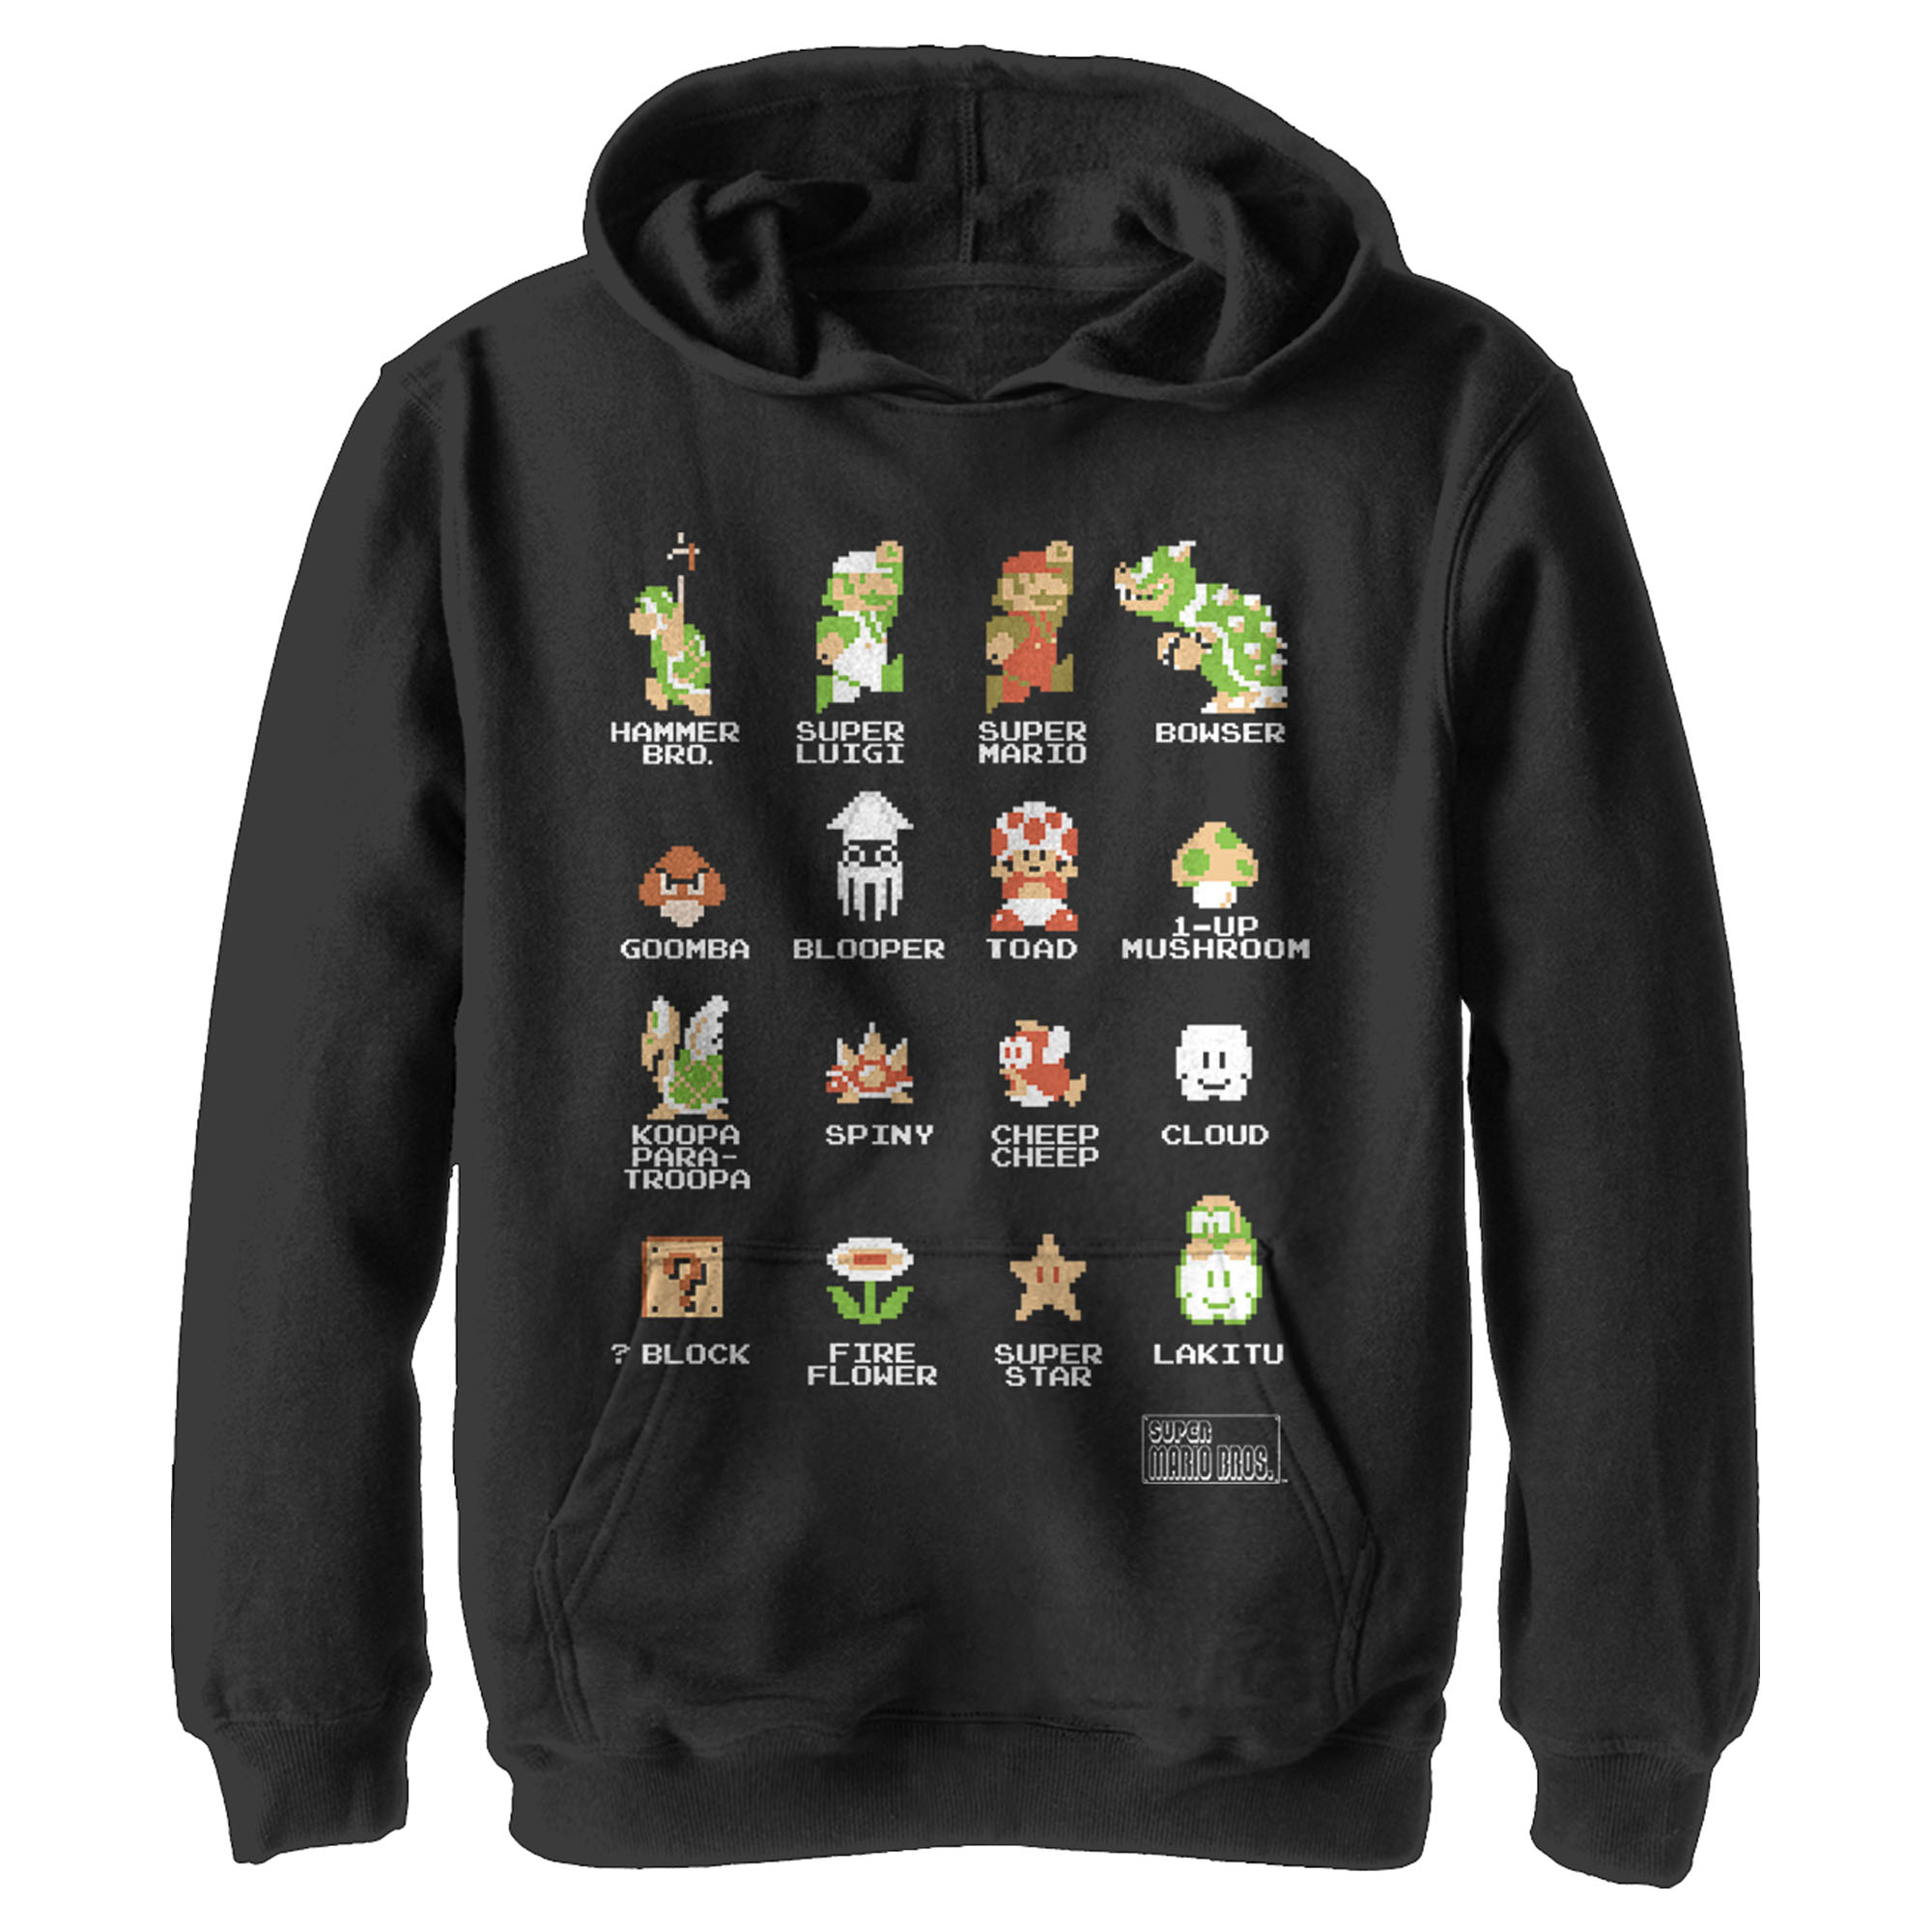 Boy's Nintendo Super Mario Bros Pixel Cast with Names  Pull Over Hoodie Black Small - image 1 of 4